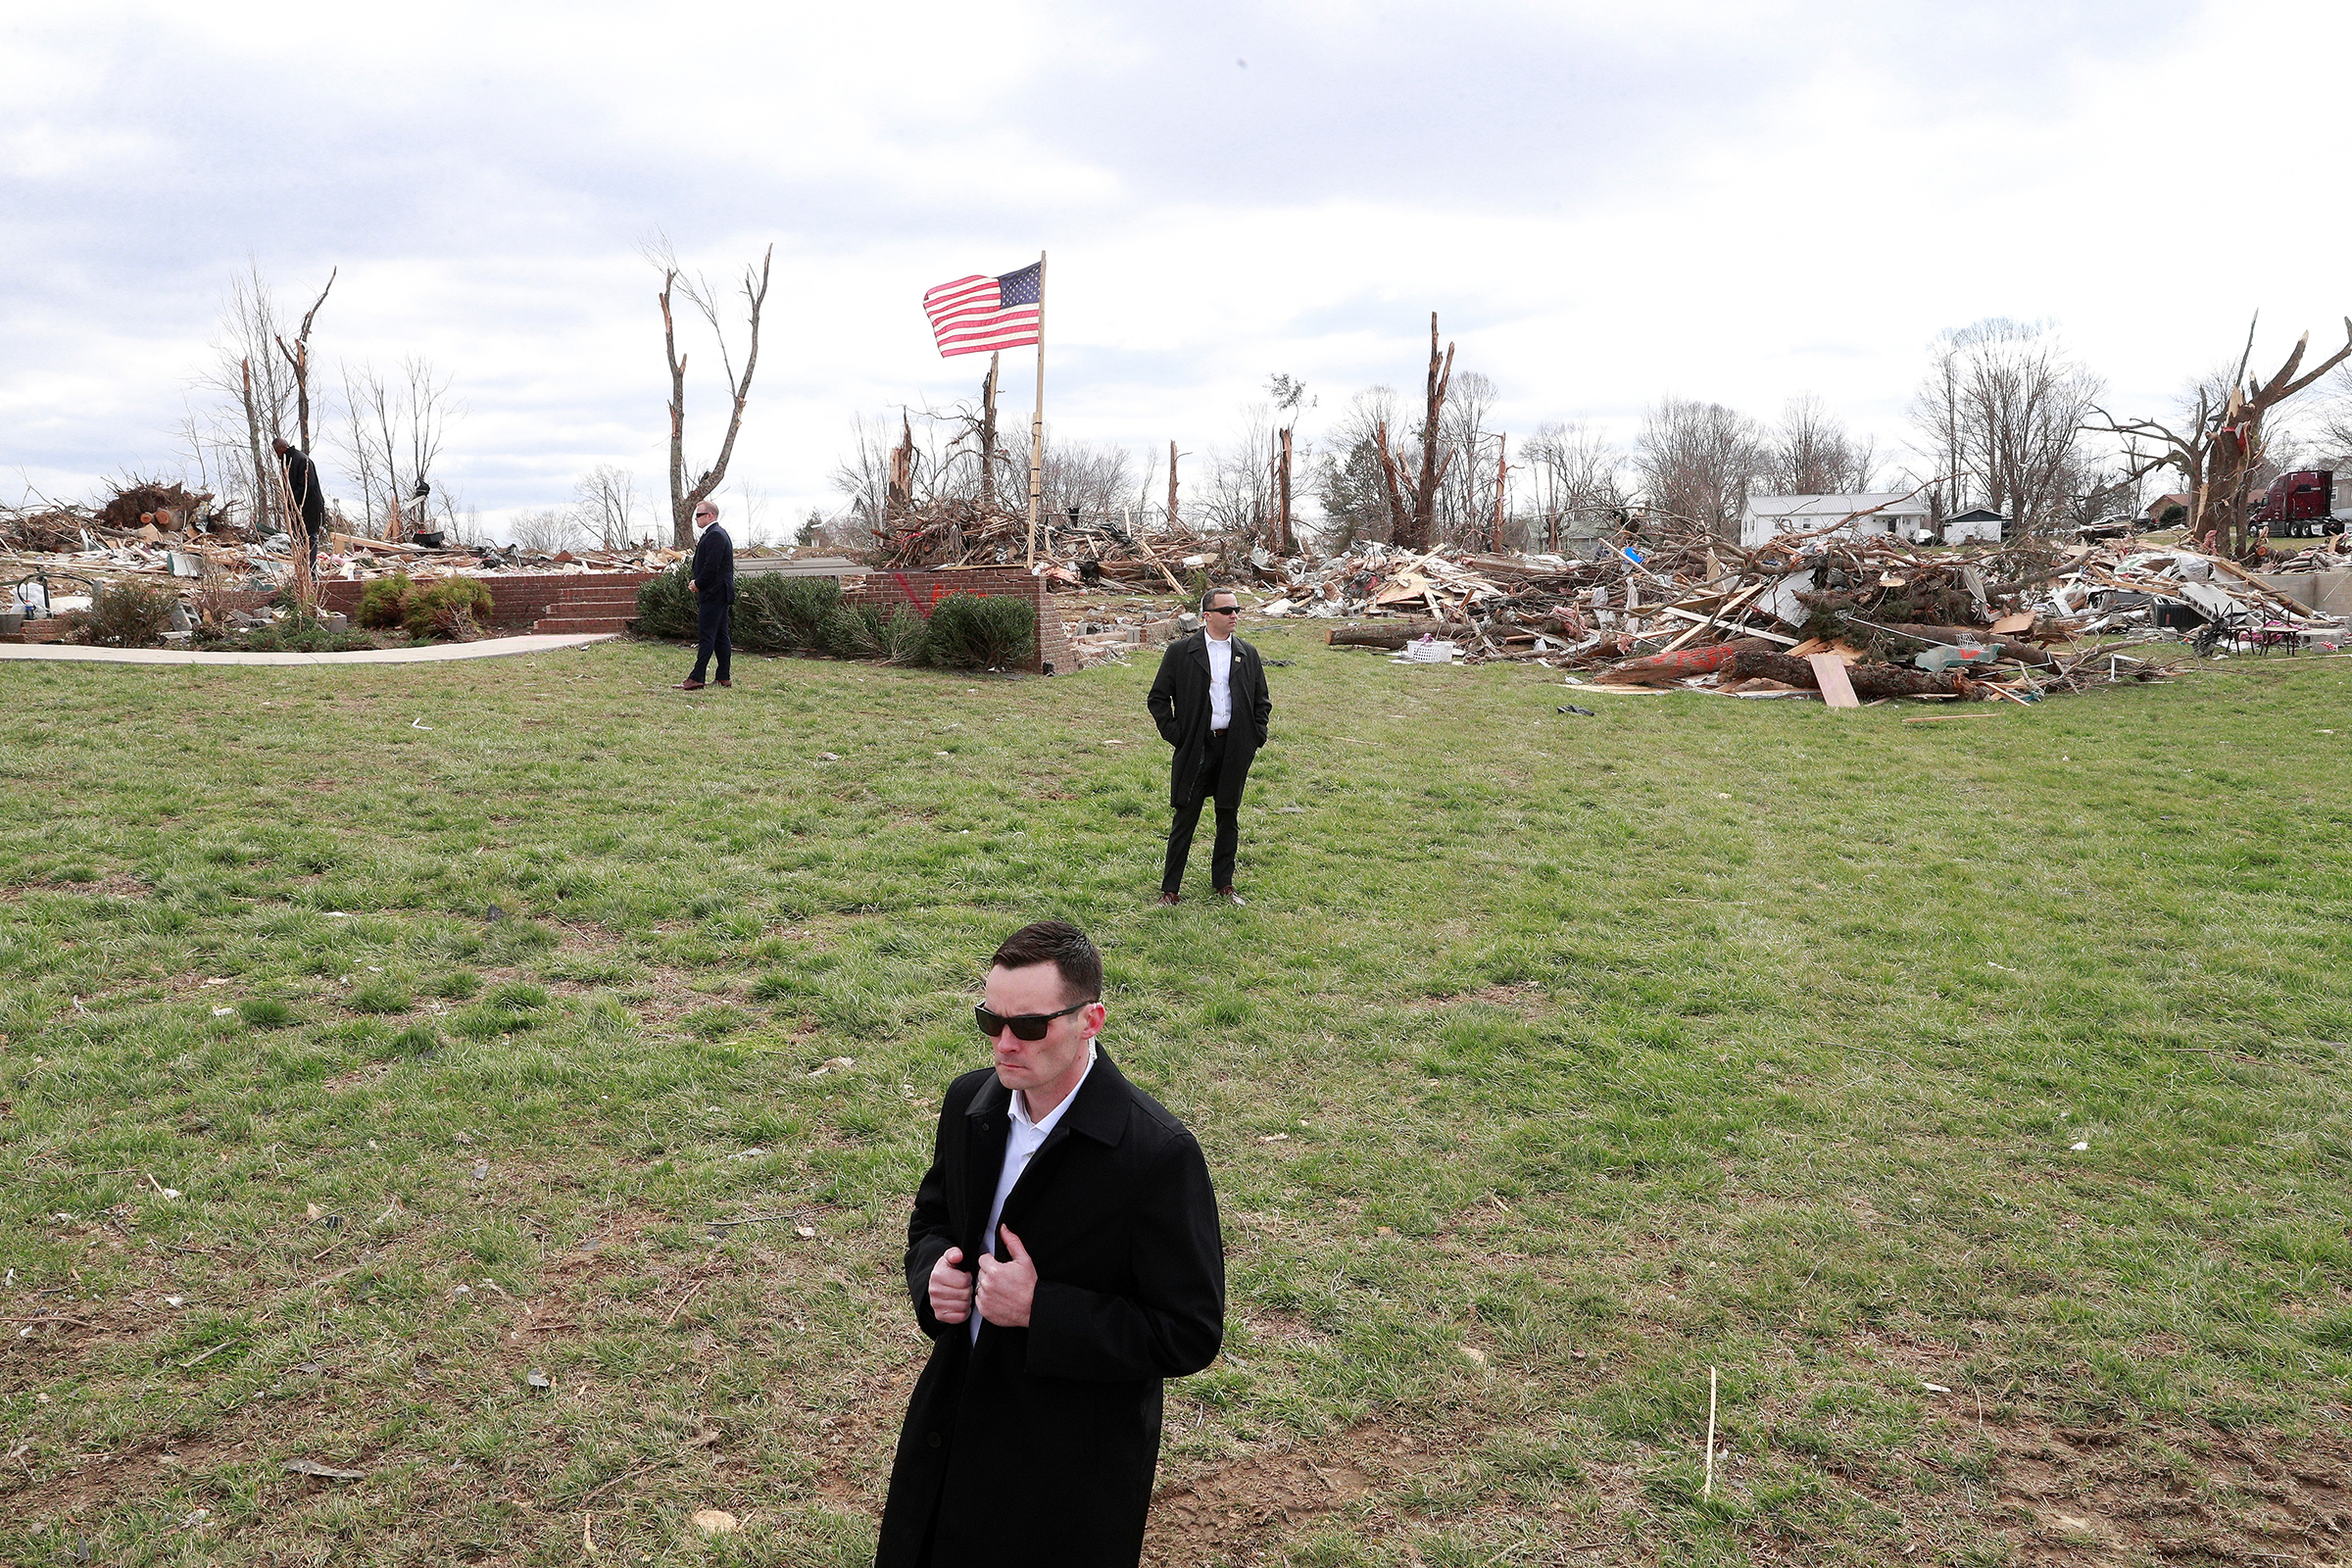 U.S. Secret Service agents stand by as President Trump, not pictured, observes tornado damage in Cookeville, east of Nashville, on March 6, 2020. (Tom Brenner—Reuters)